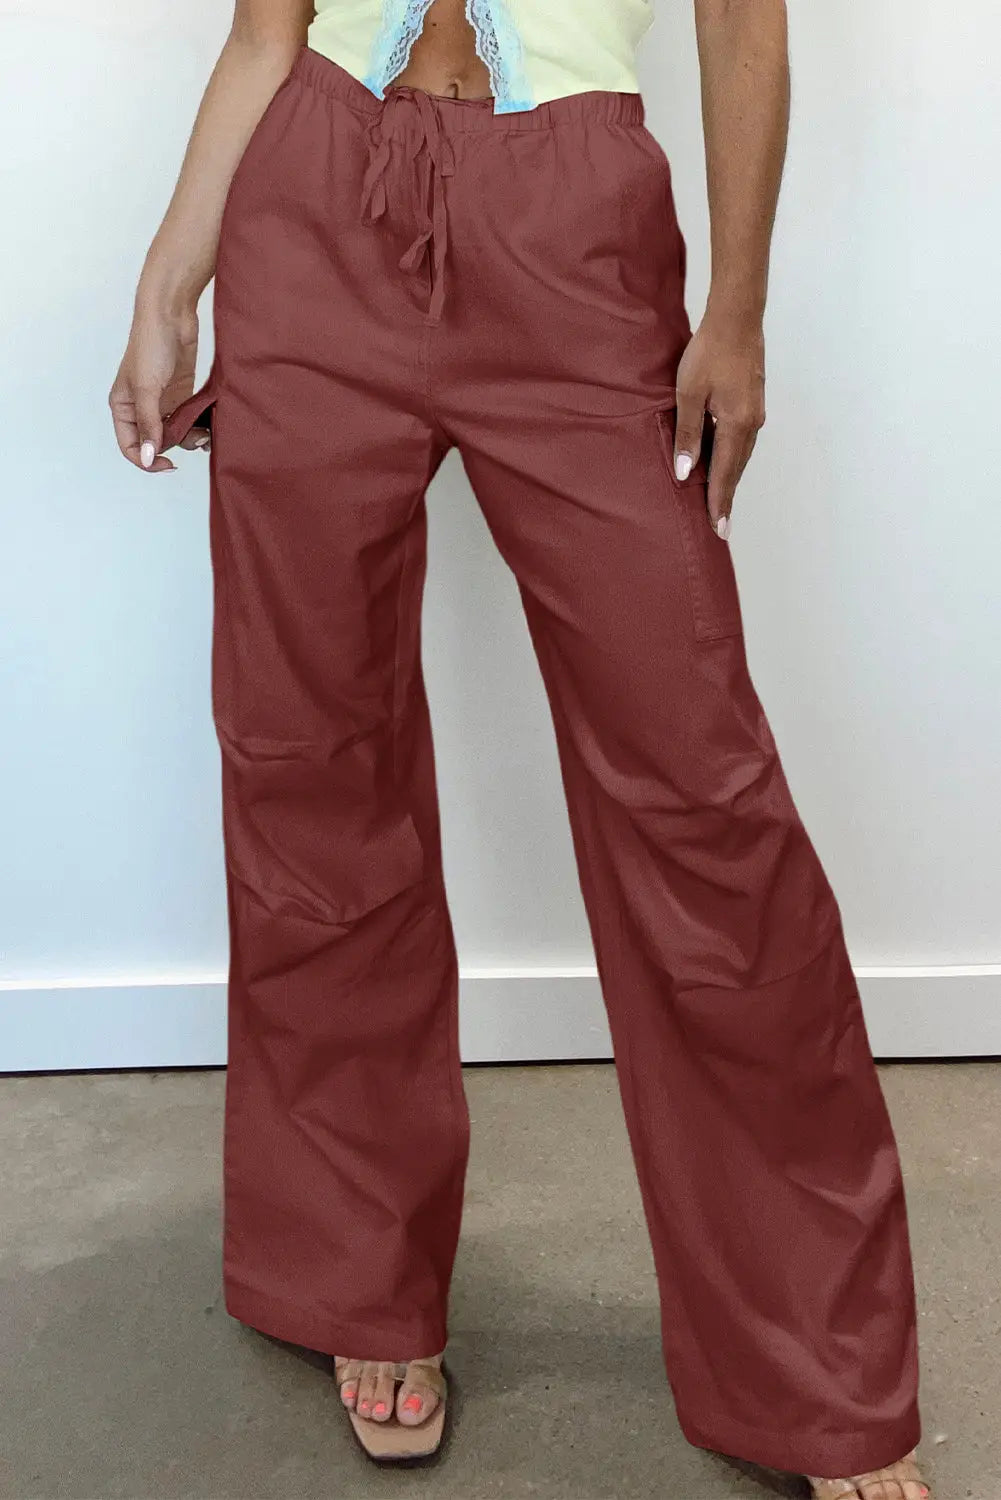 Mineral red solid color drawstring waist wide leg cargo